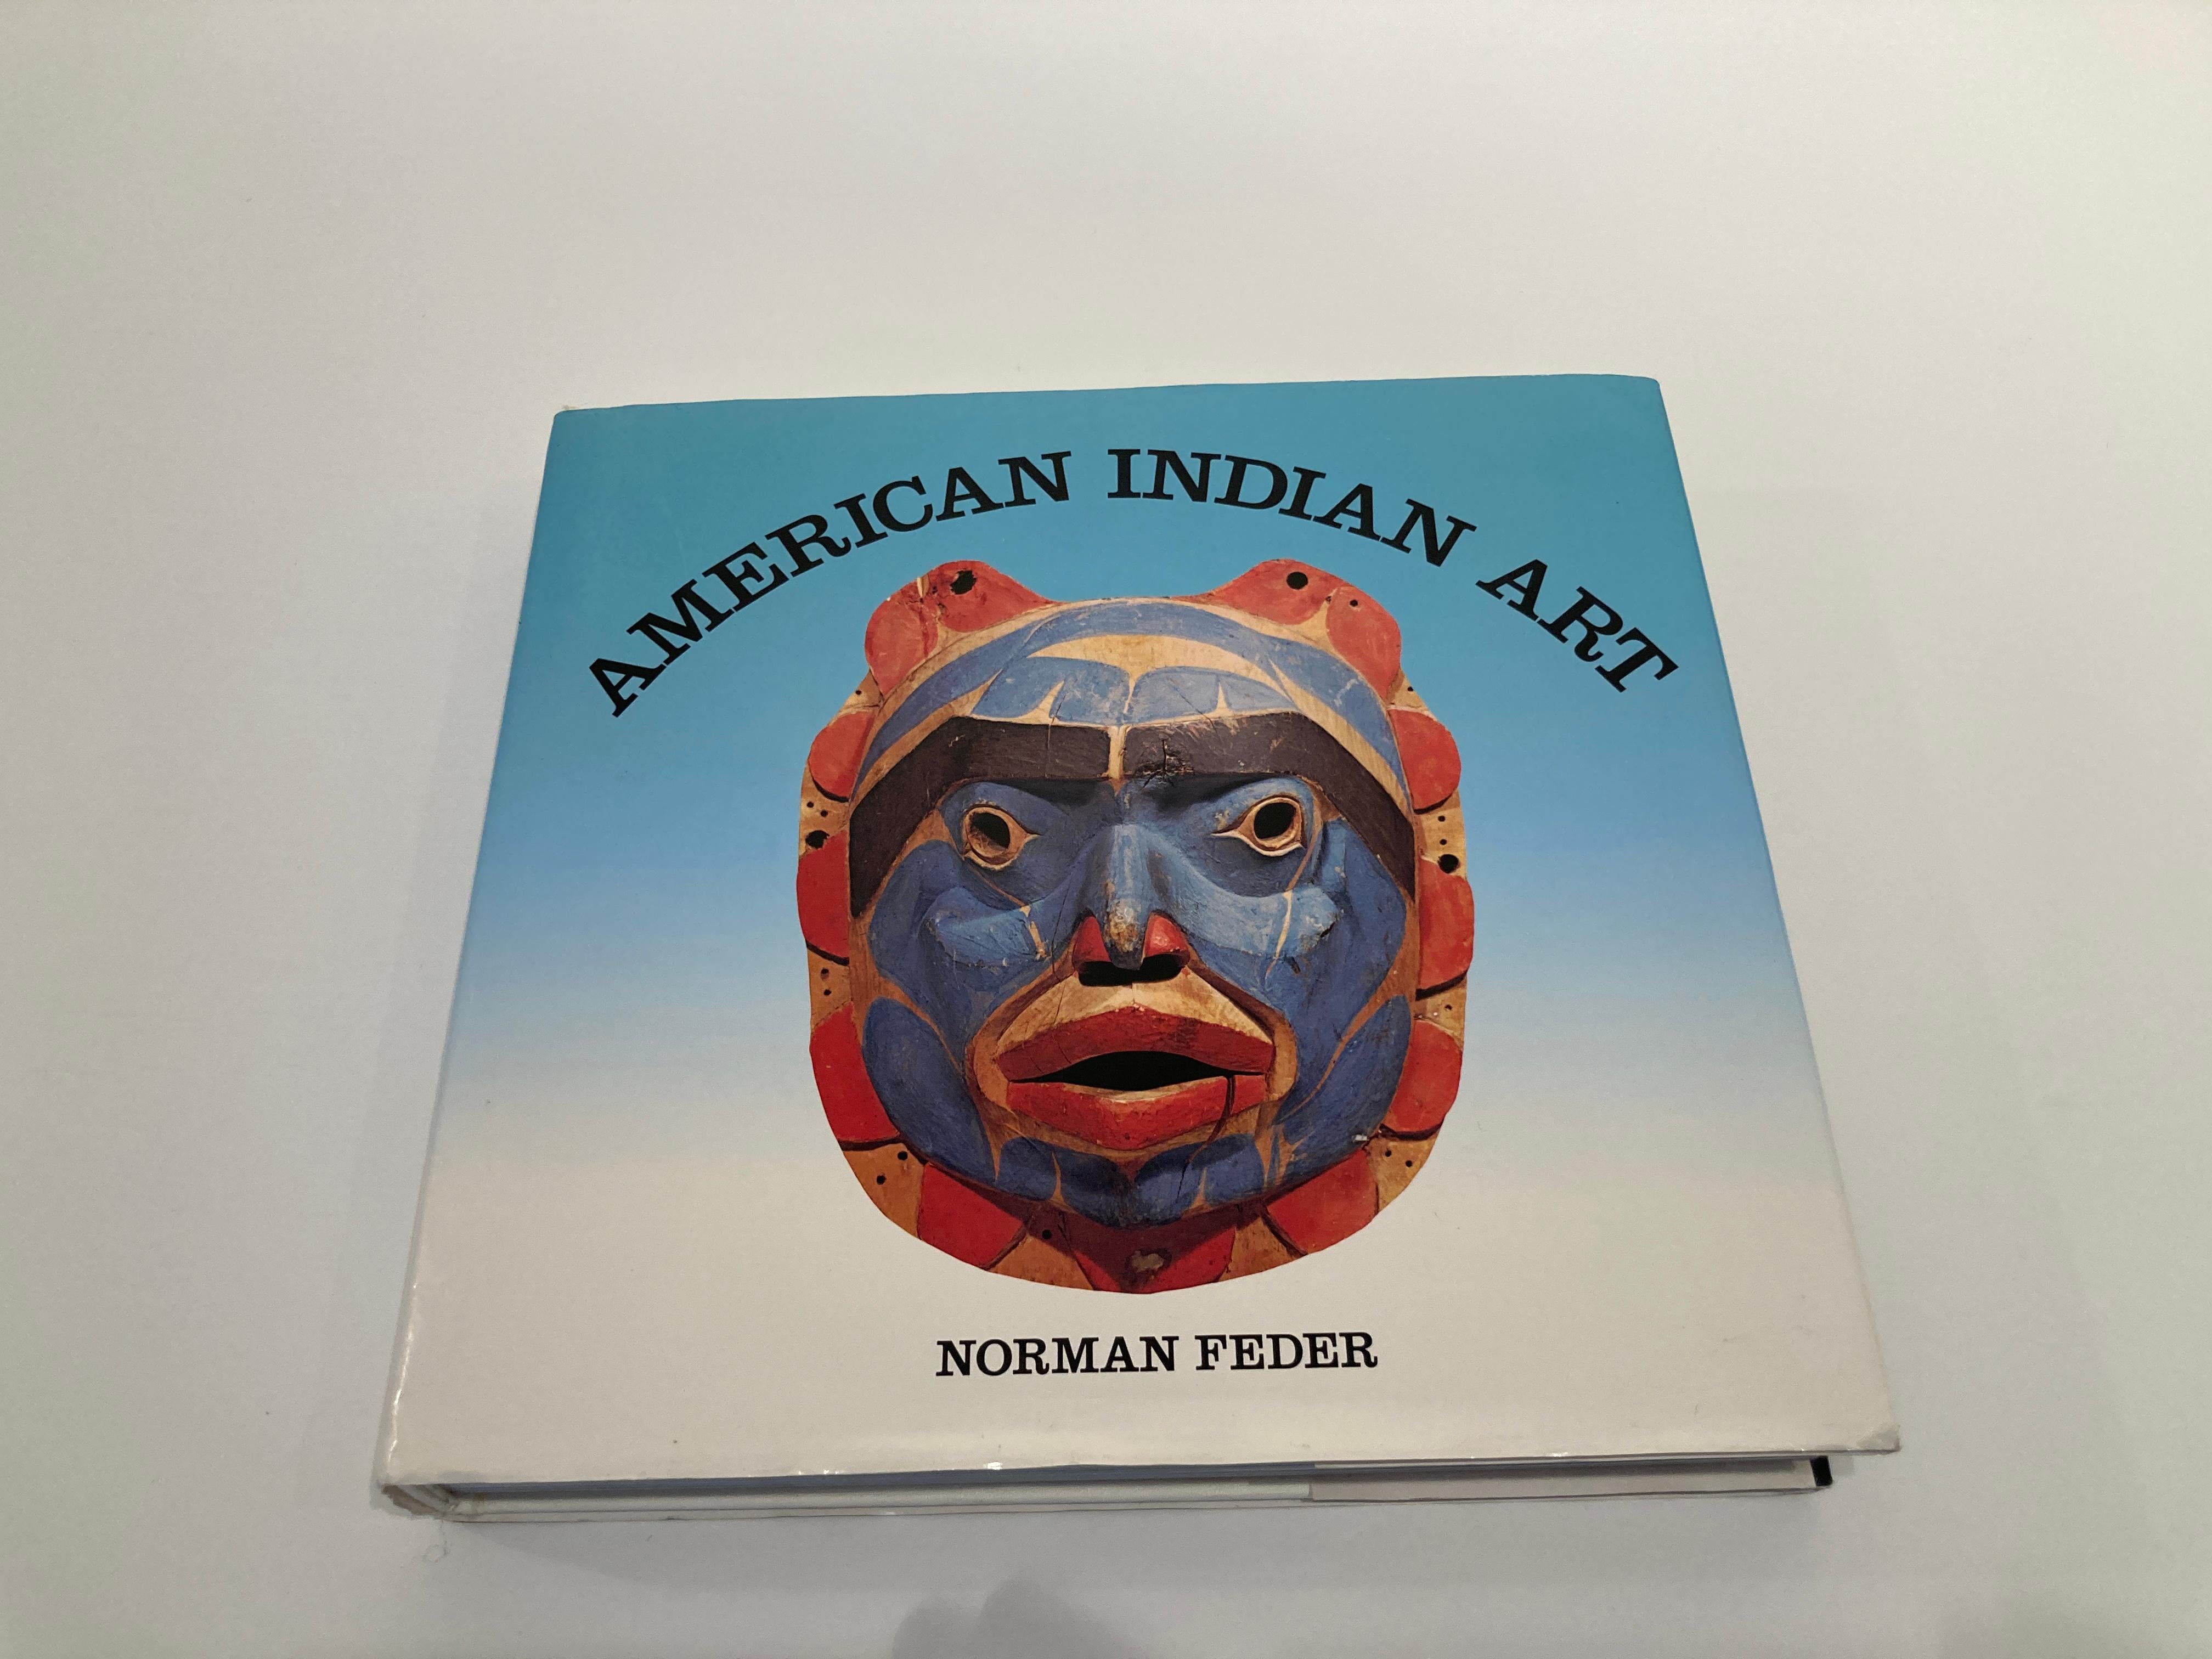 20th Century American Indian Art by Norman Feder Hardcover Book